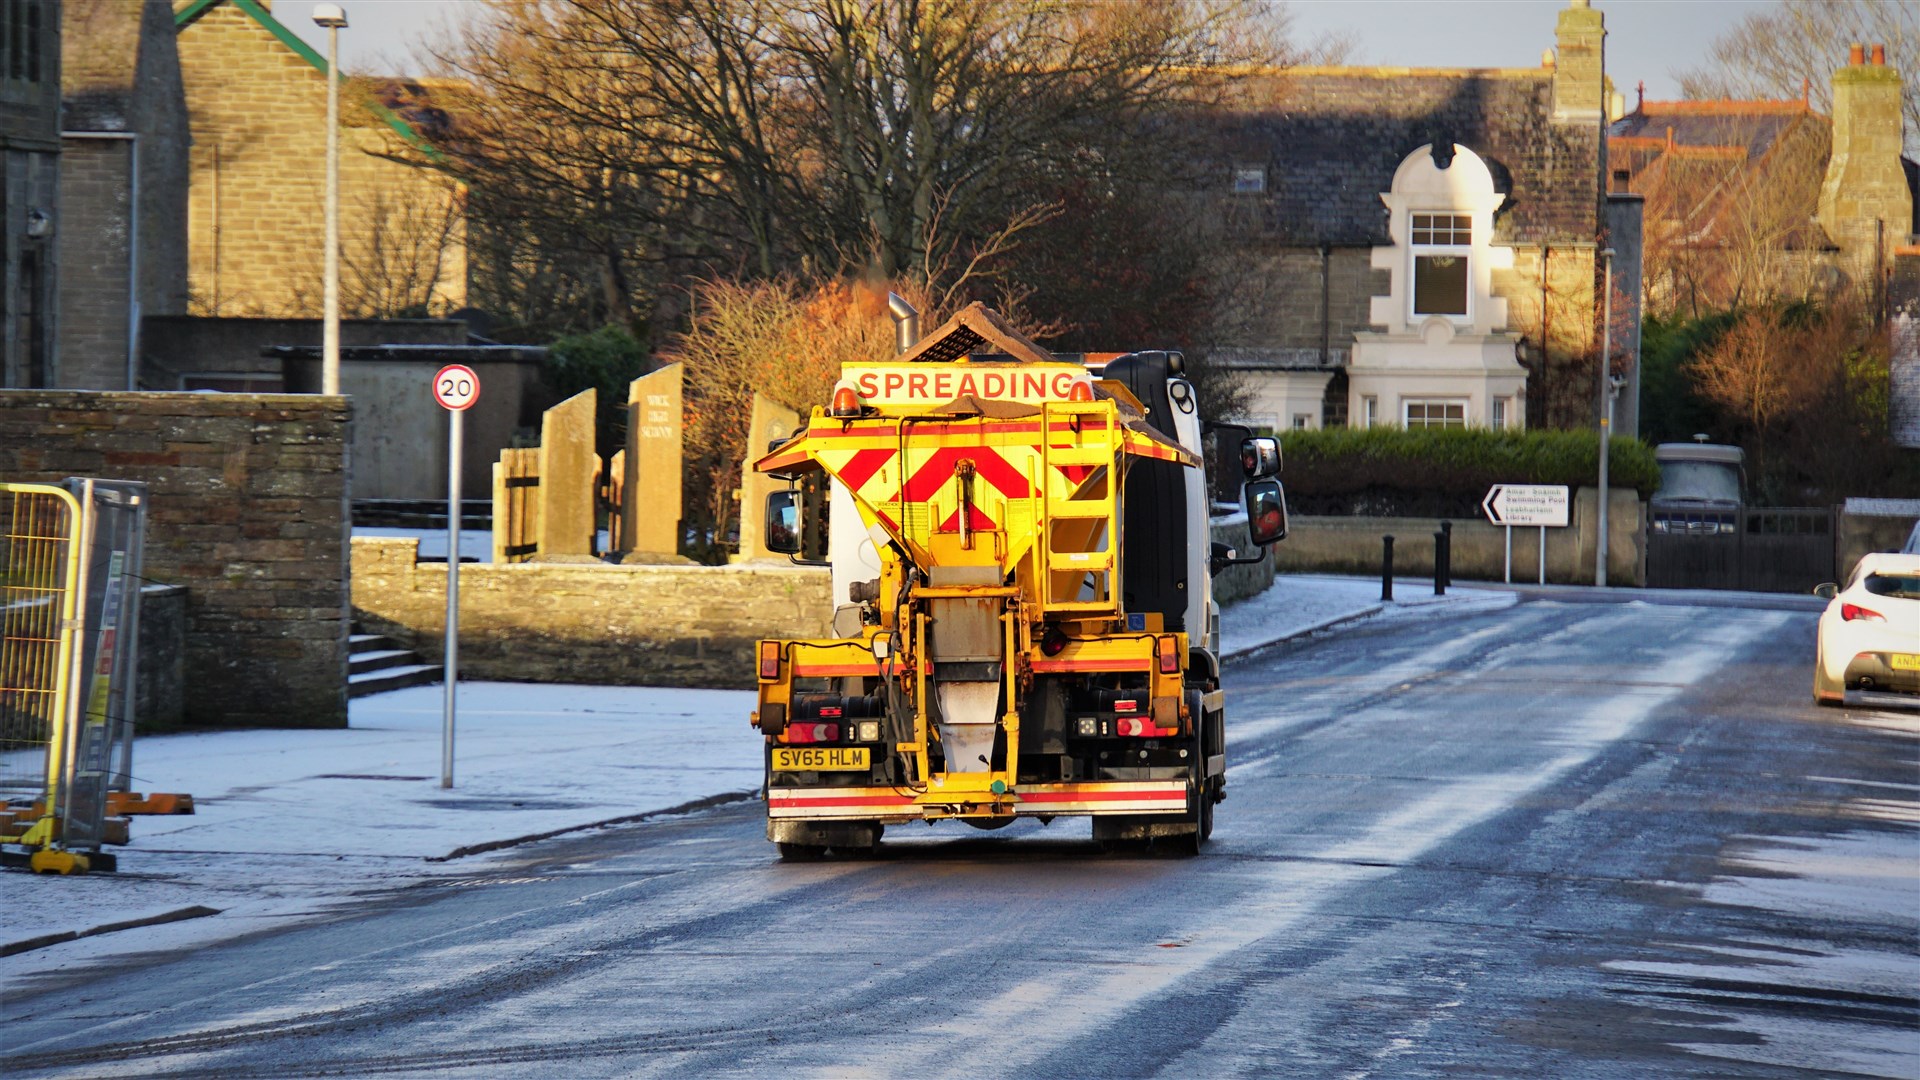 Council teams are continuing to treat roads as wintry conditions continue.